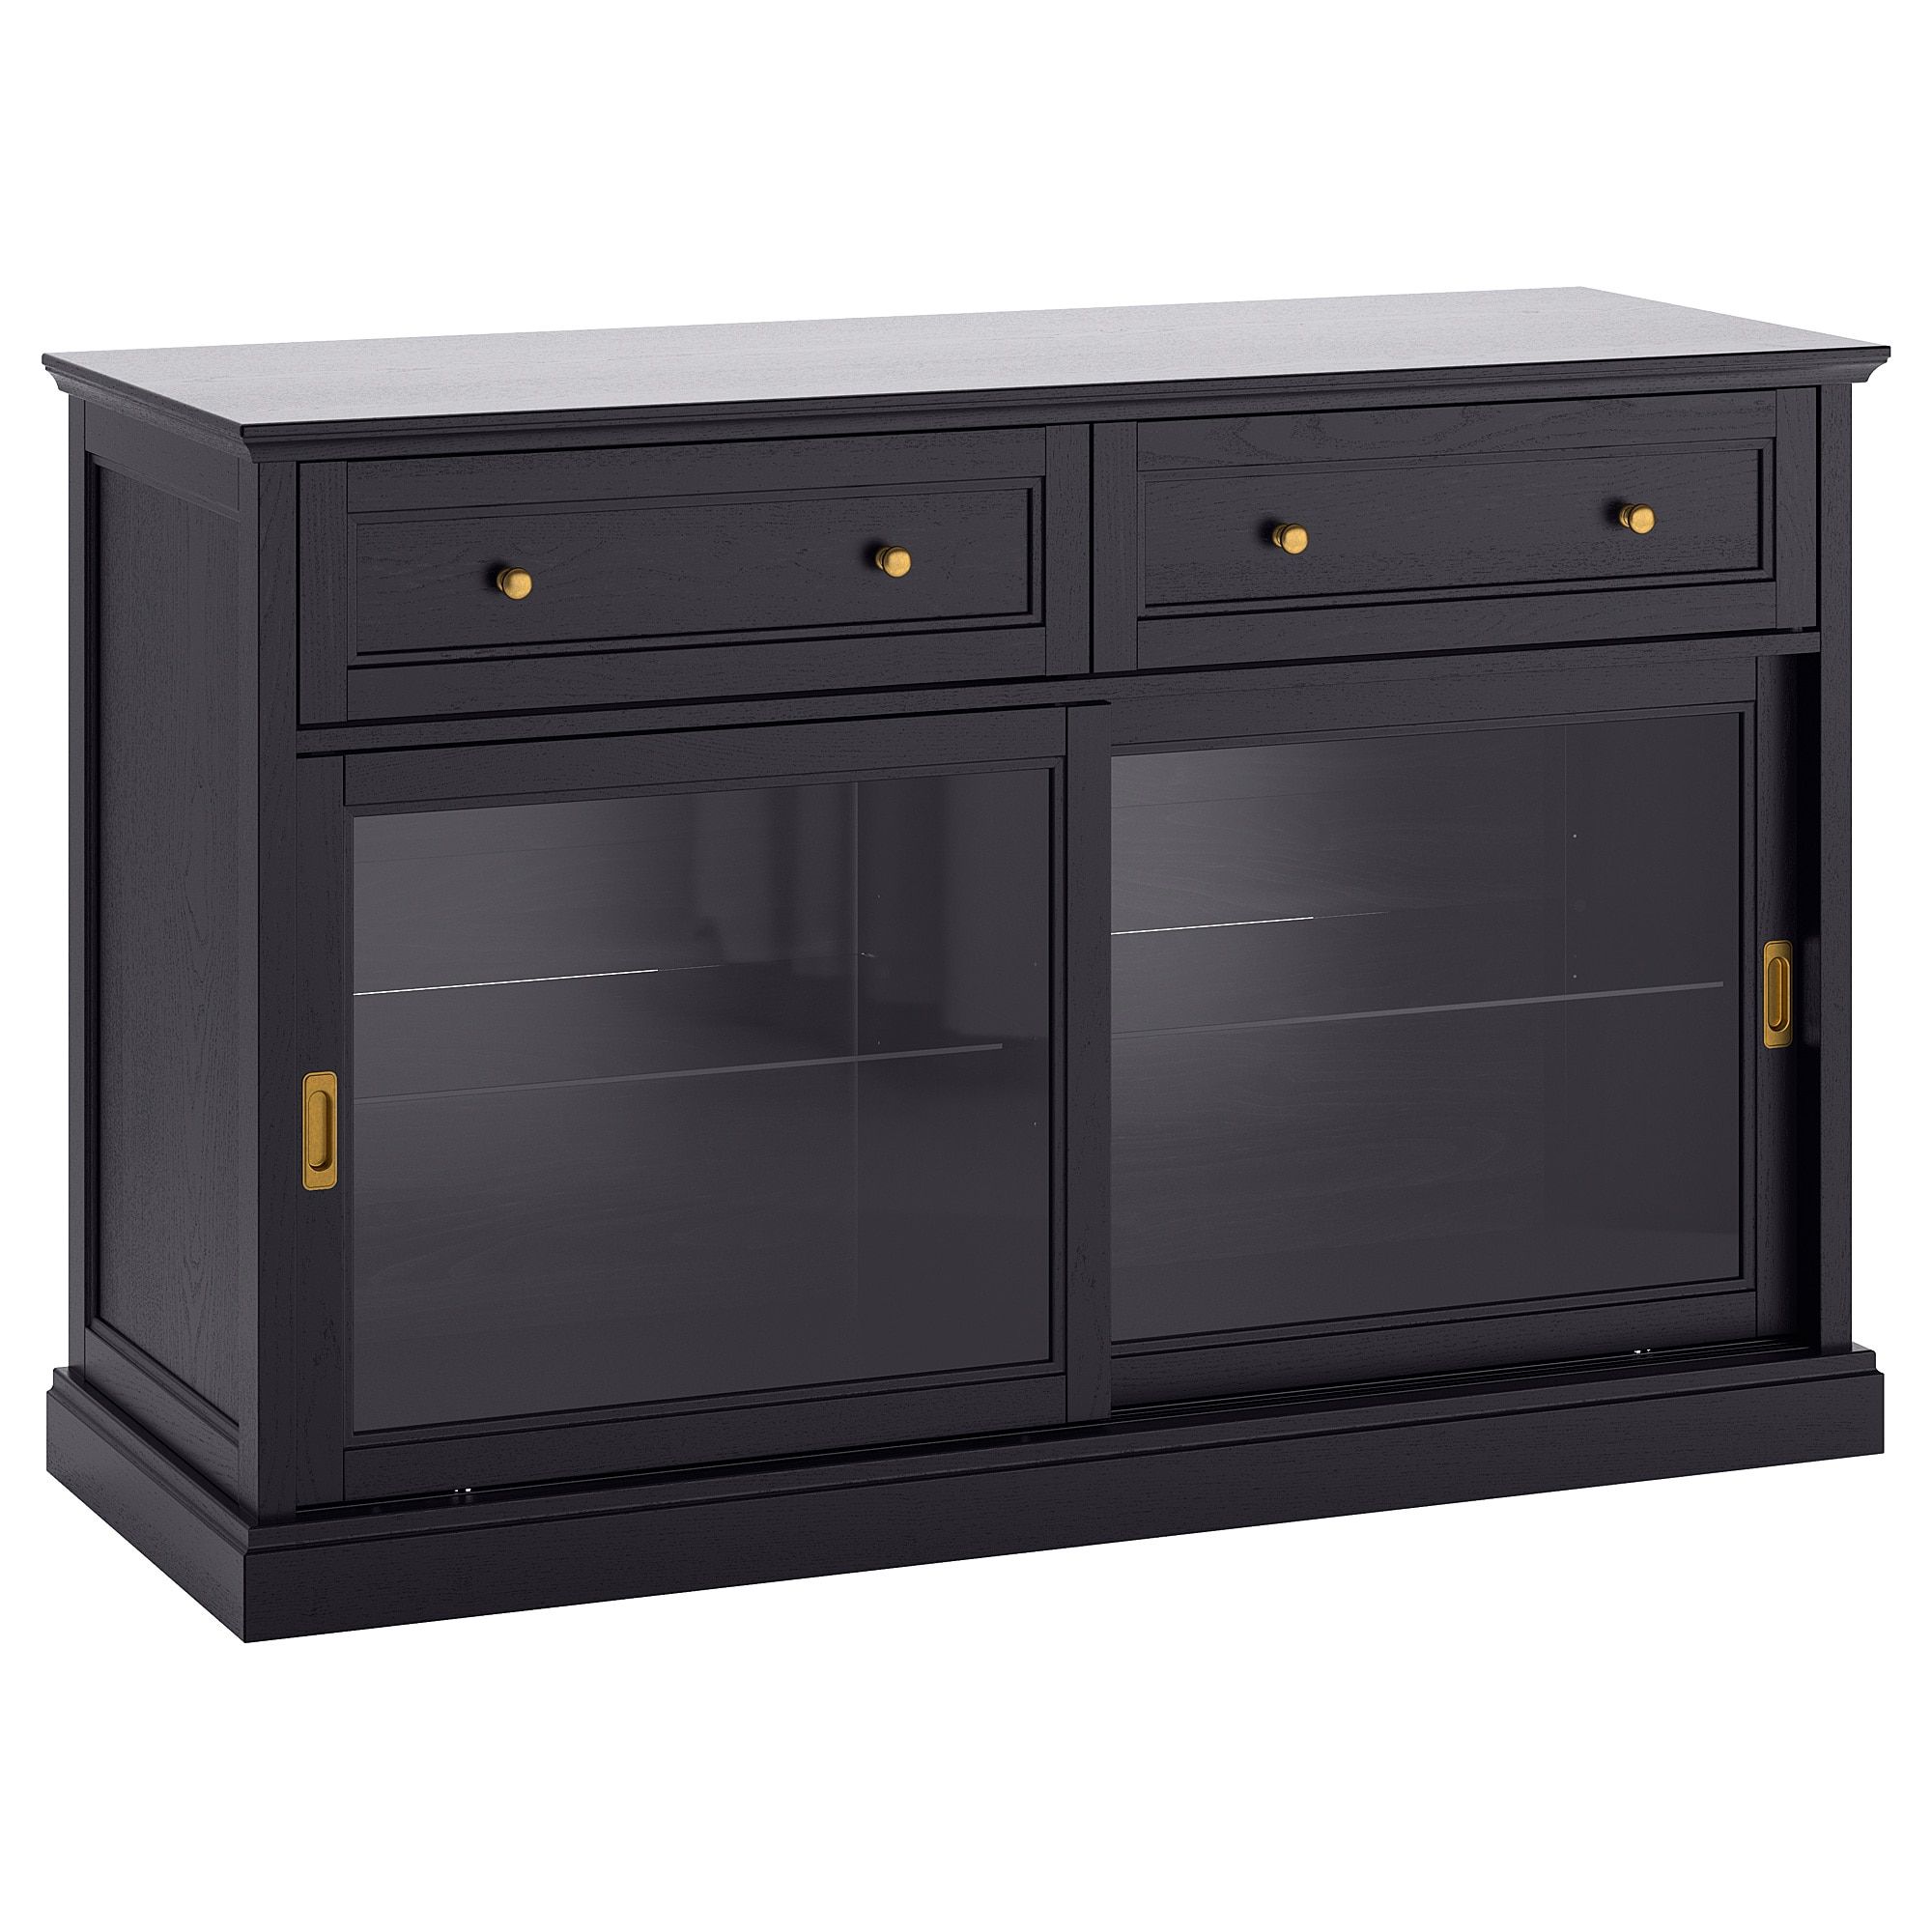 Malsjö – Sideboard, Black Stained Pertaining To South Miami Sideboards (Gallery 19 of 20)